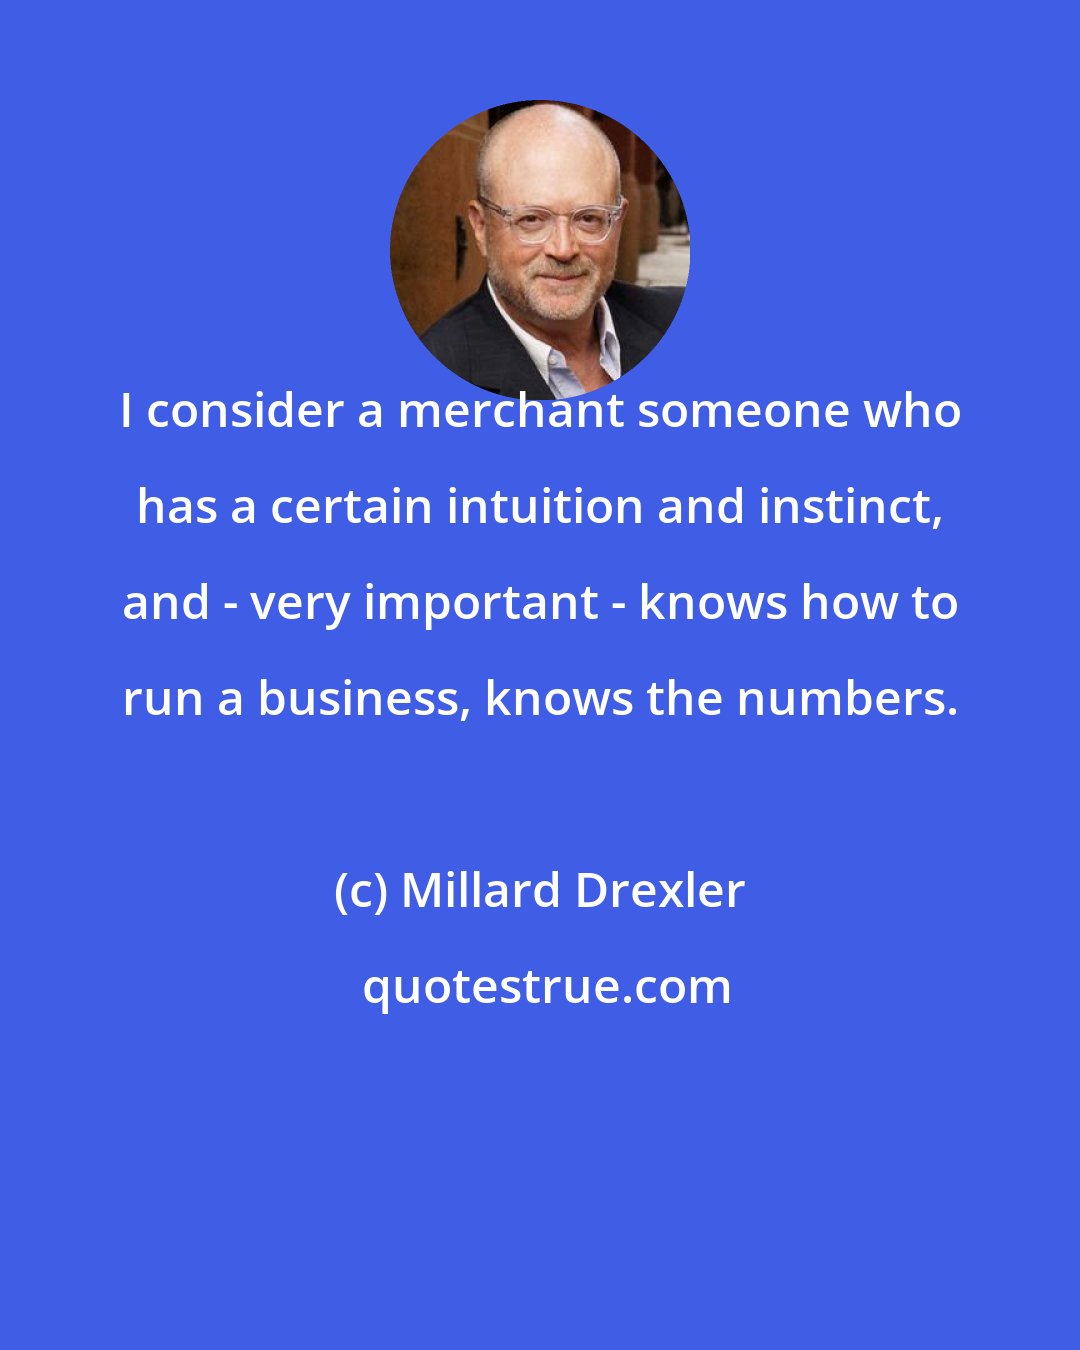 Millard Drexler: I consider a merchant someone who has a certain intuition and instinct, and - very important - knows how to run a business, knows the numbers.